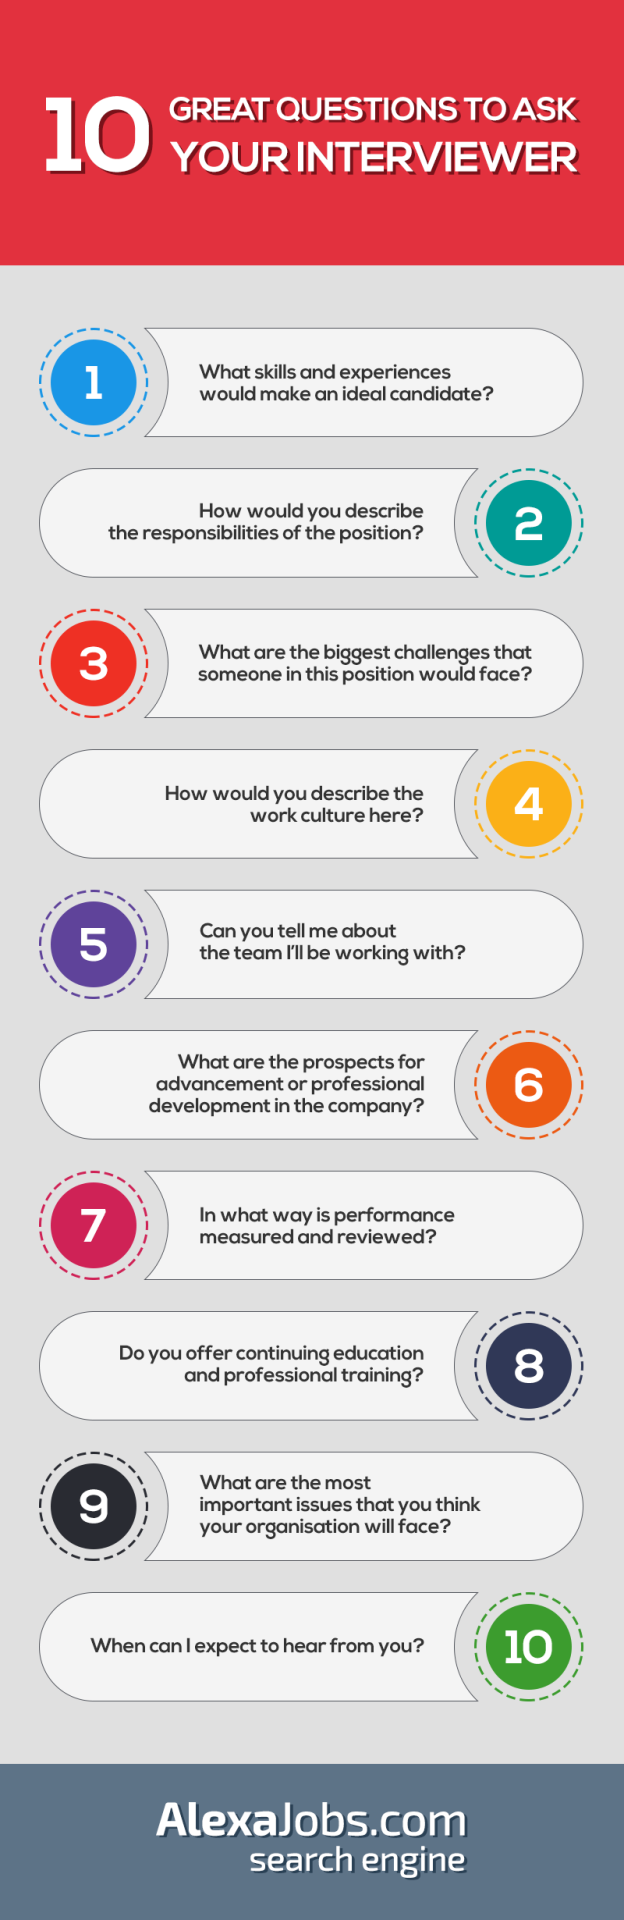 10 Great Questions To Ask Your Interviewer